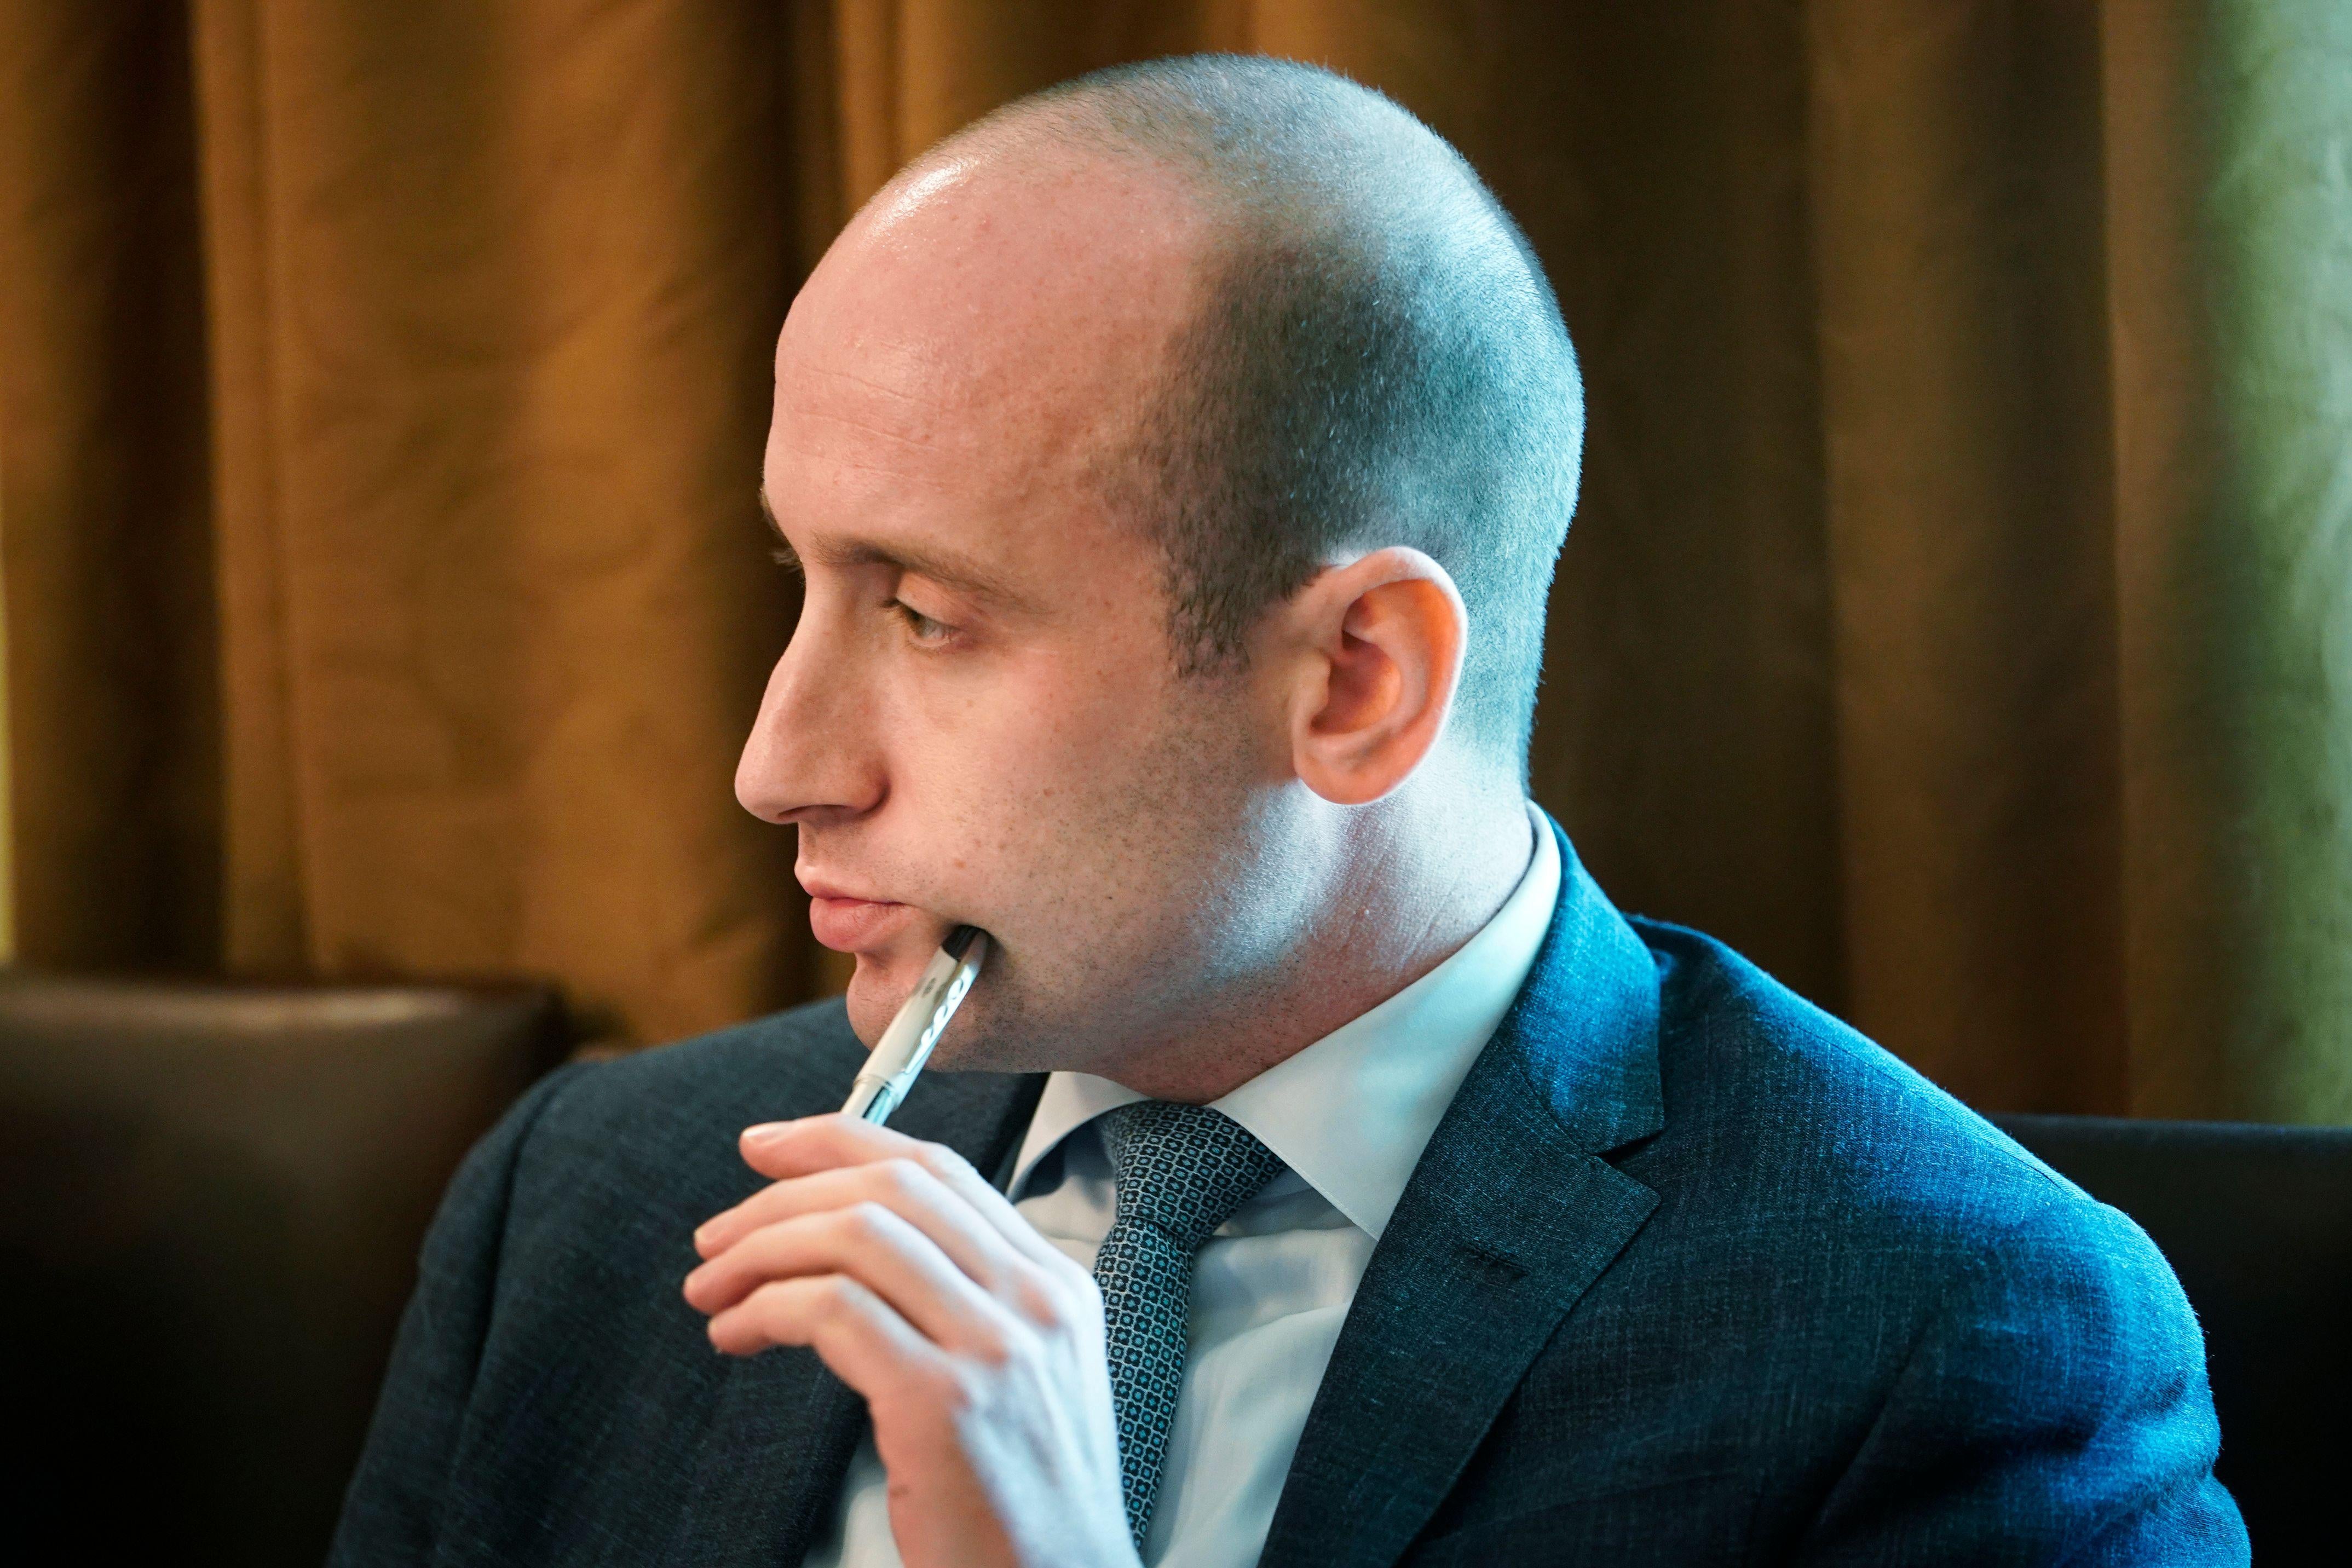 Senior advisor Stephen Miller attends a Cabinet meeting in the Cabinet Room of the White House.